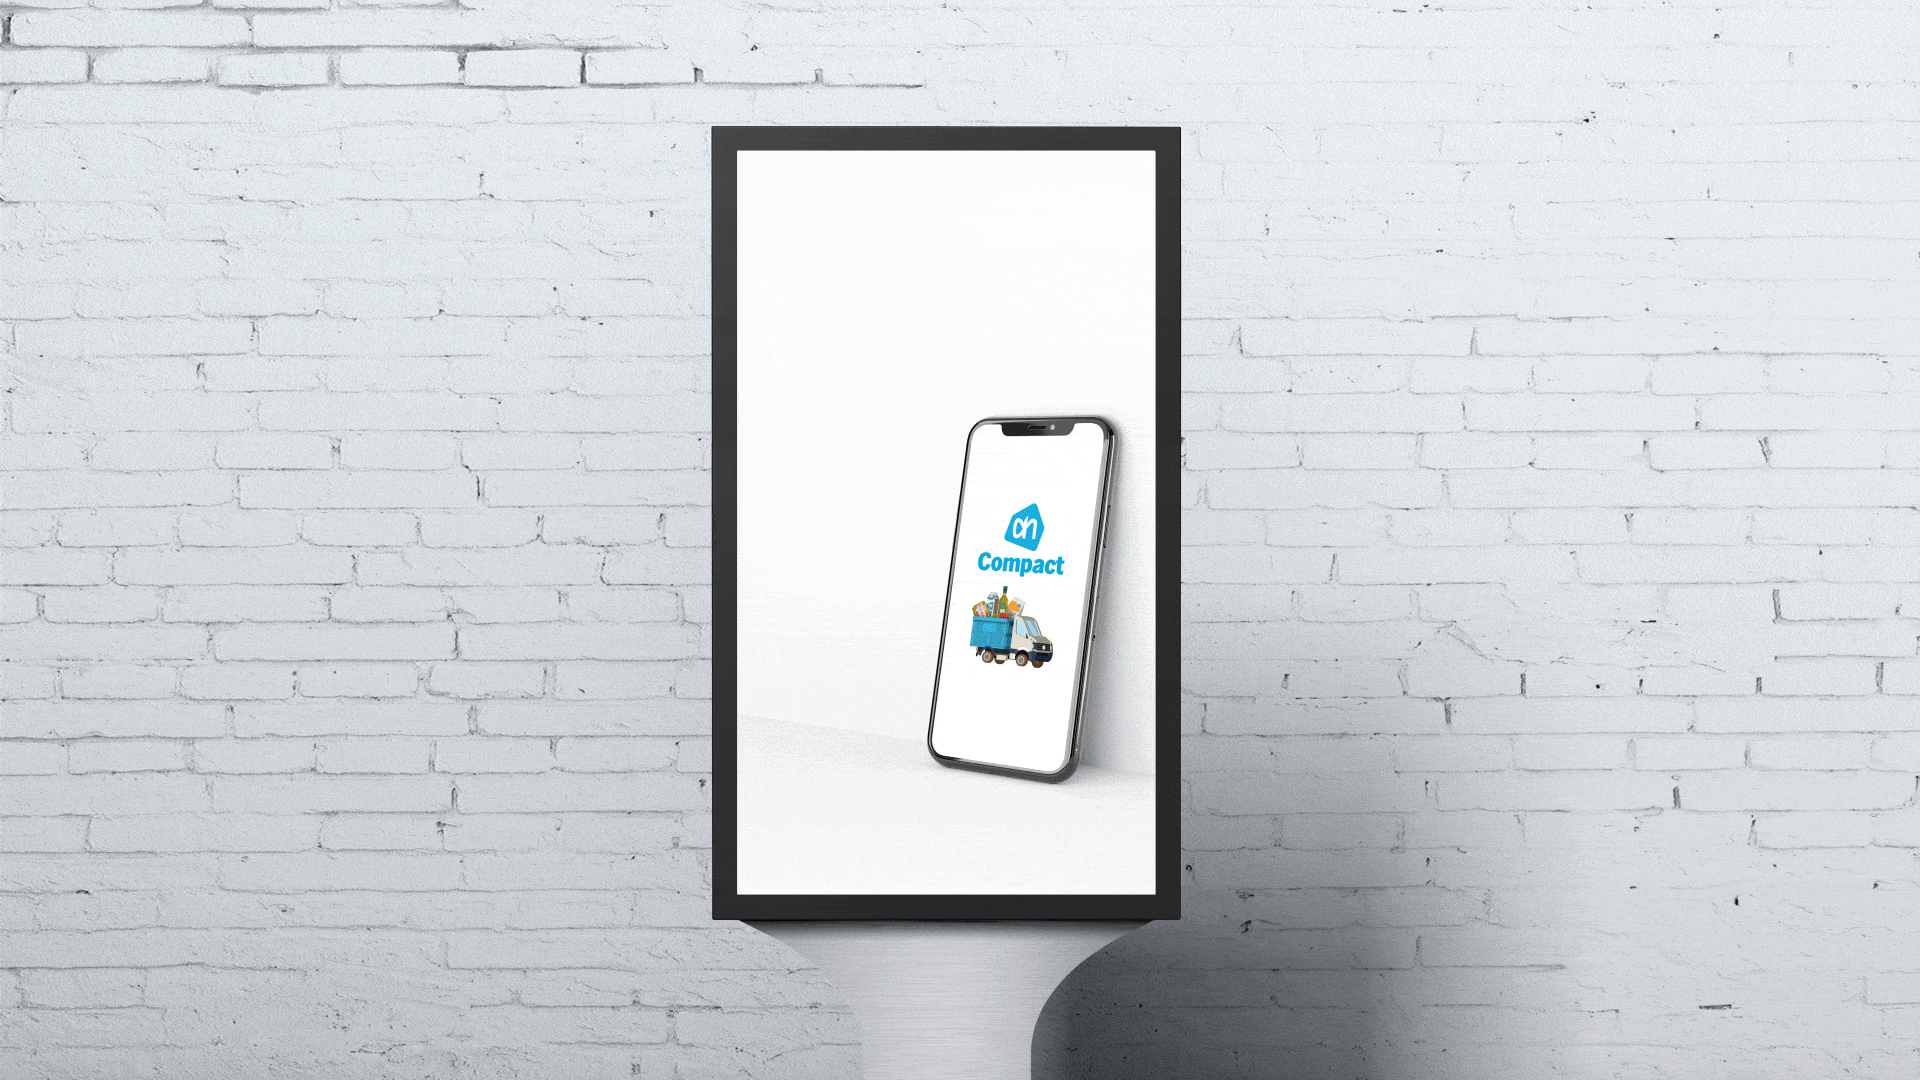 Portable communications device, Mobile phone, Telephony, Rectangle, Wall, Font